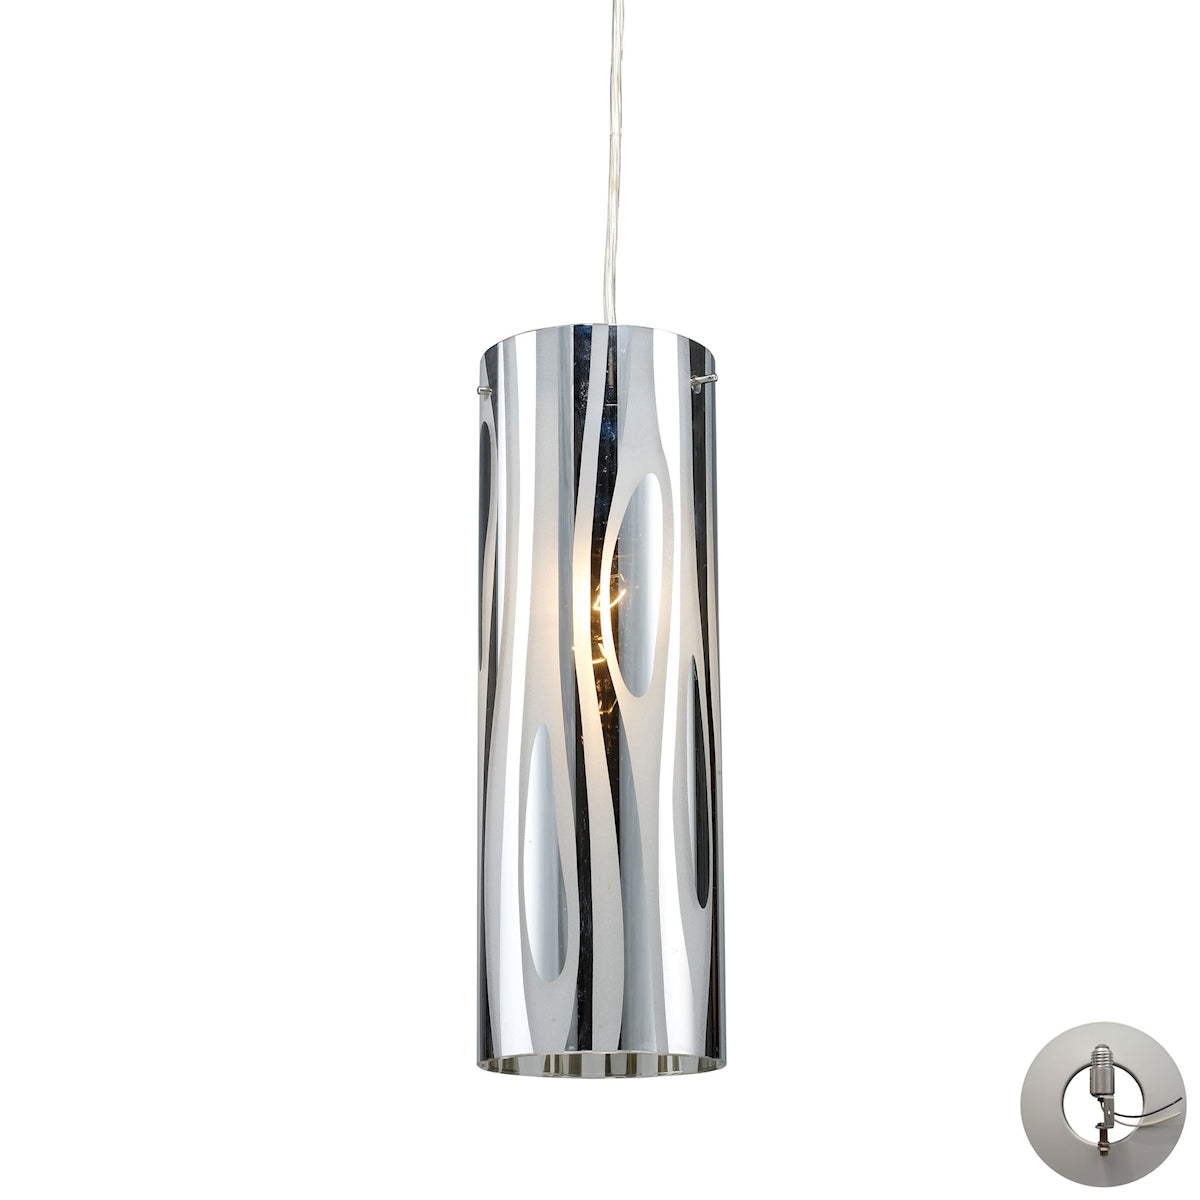 ELK Lighting 31078/1-LA Chromia 1-Light Mini Pendant in Polished Chrome with Cylinder Shade - Includes Adapter Kit